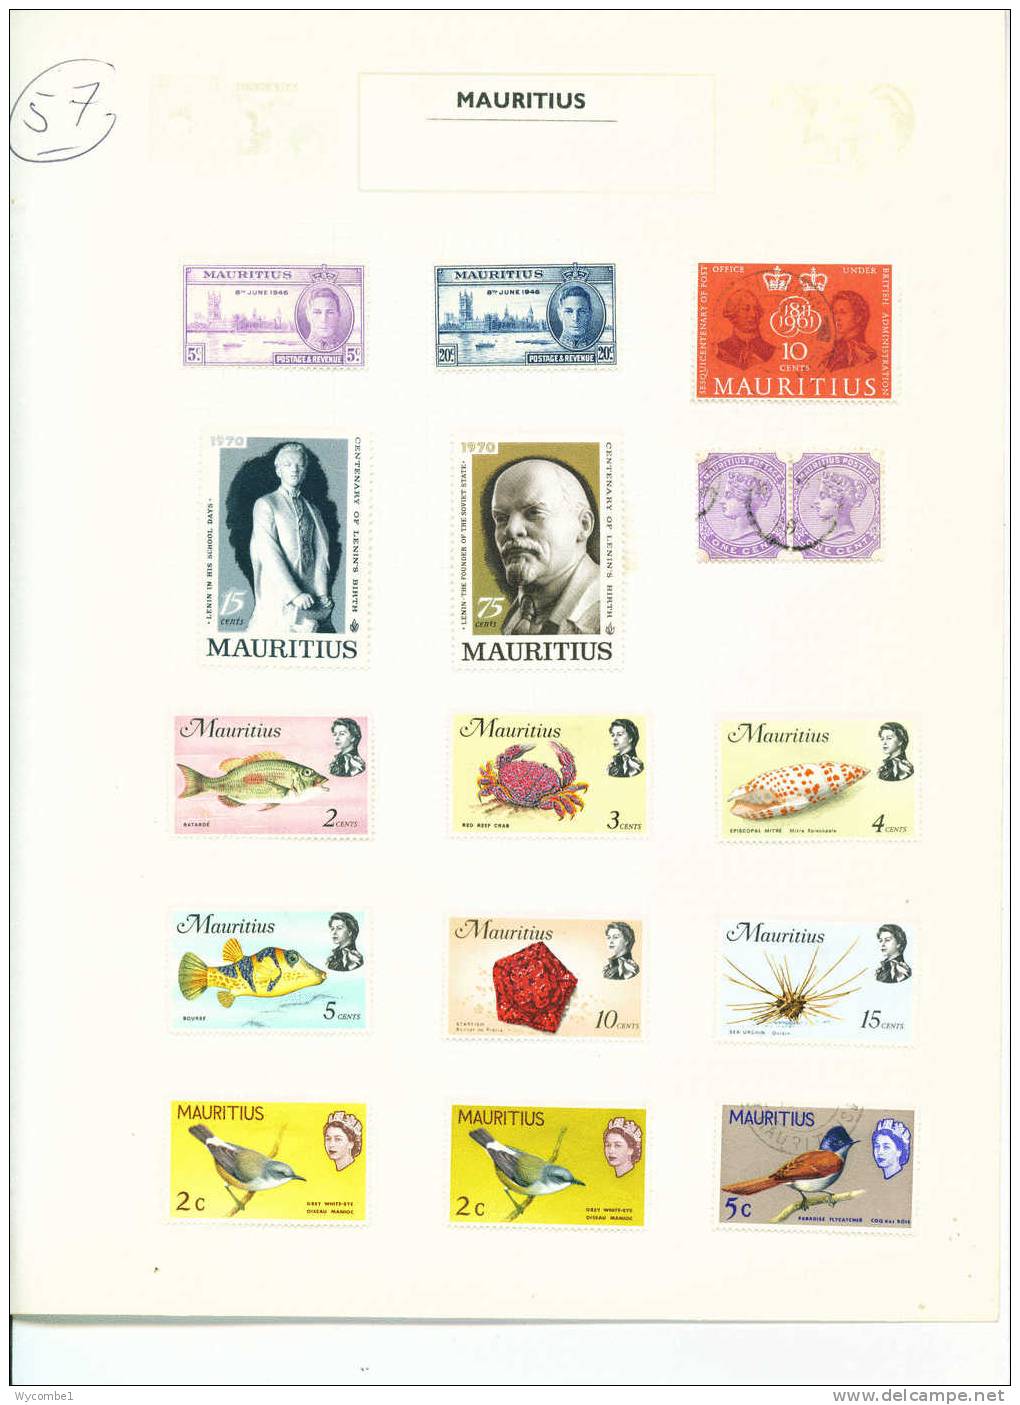 MAURITIUS - Album Page Of Stamps As Scan (Clearance Lot) - Maurice (...-1967)